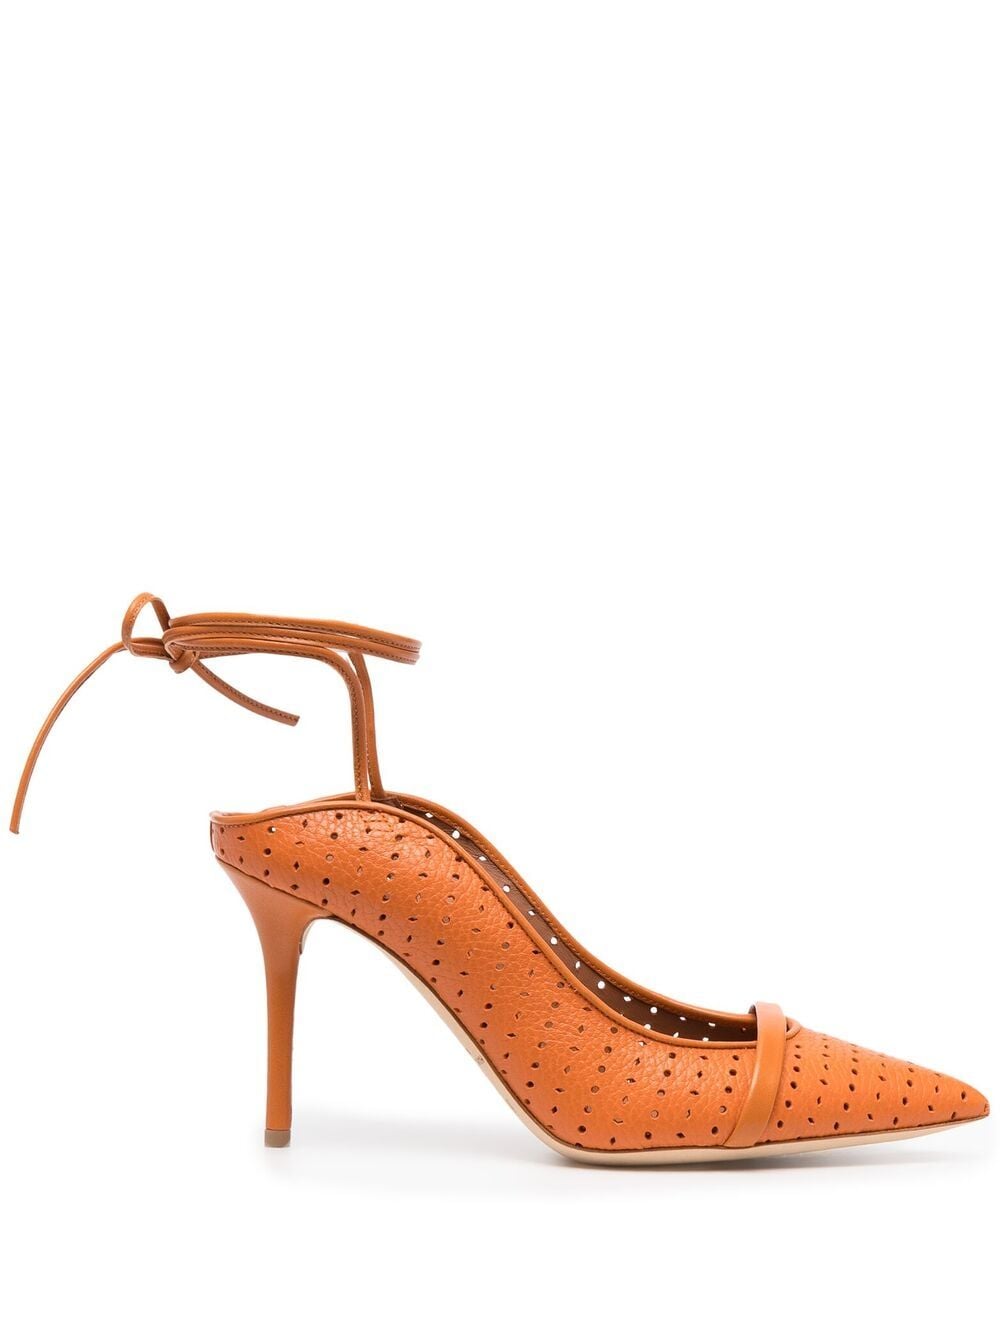 Malone Souliers Ami 85mm Perforated Pumps In Orange